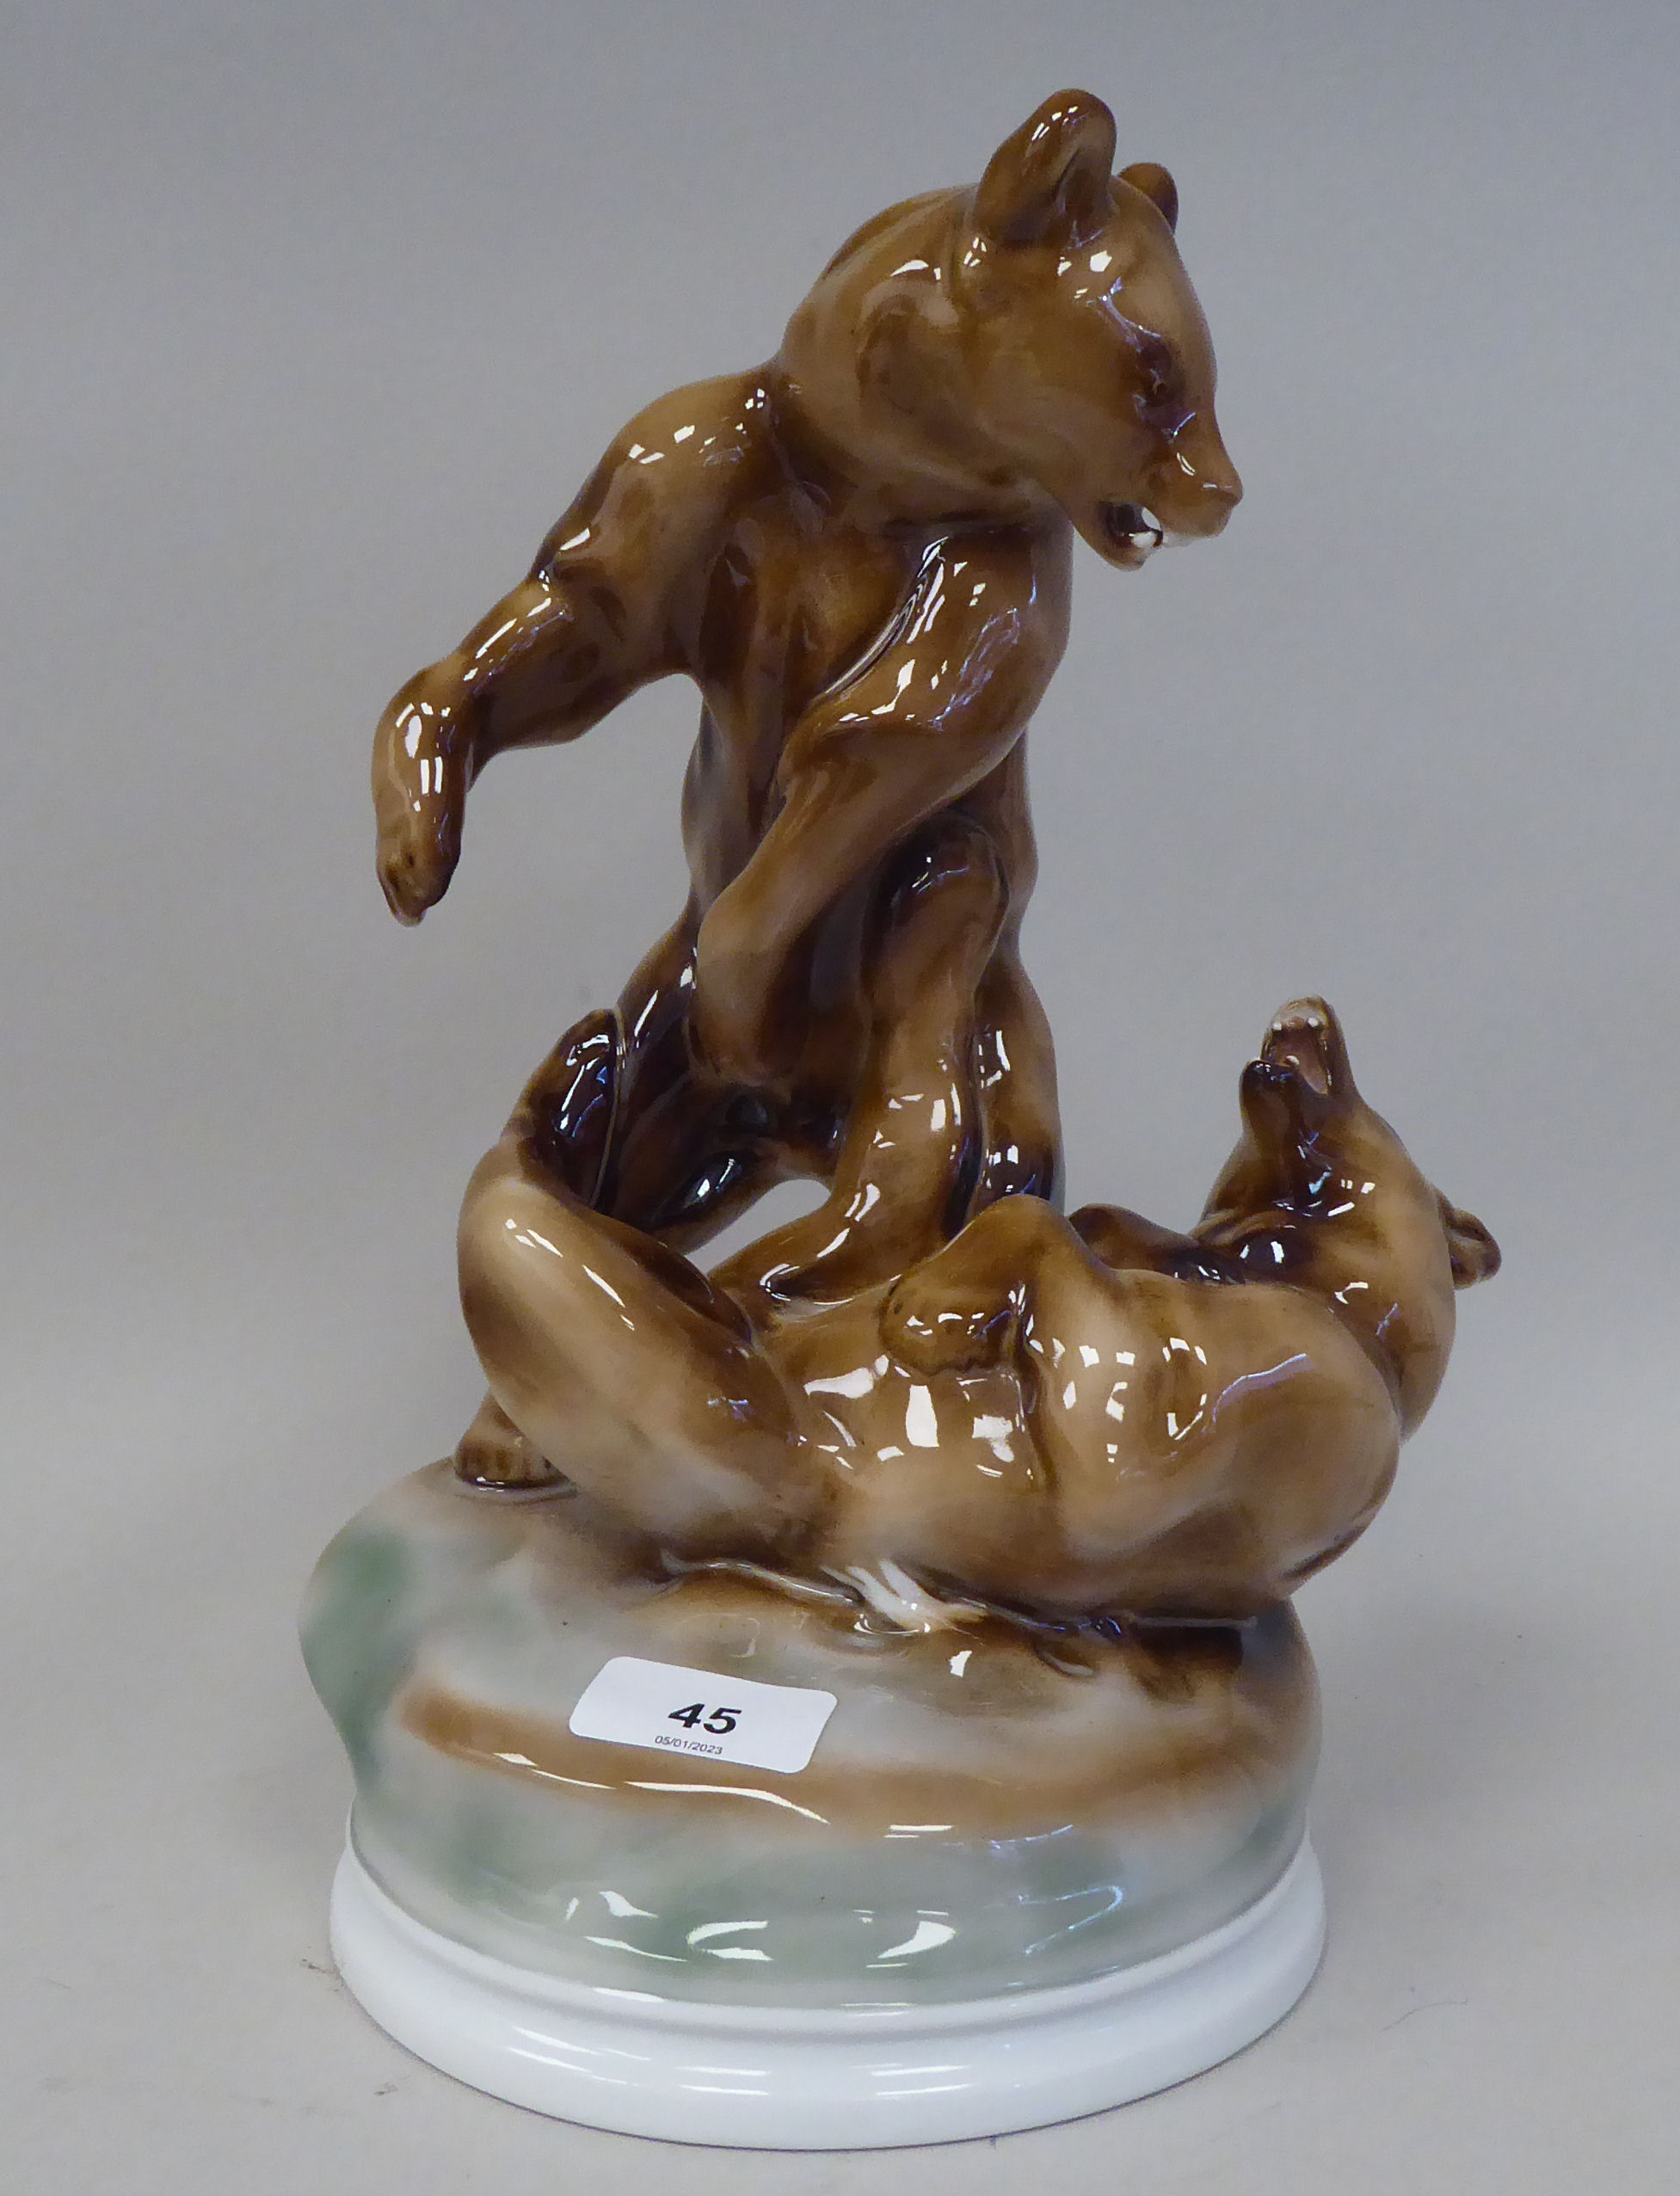 A Zsolnay Pecs porcelain group, two fighting brown bears, on a circular base  bears a printed